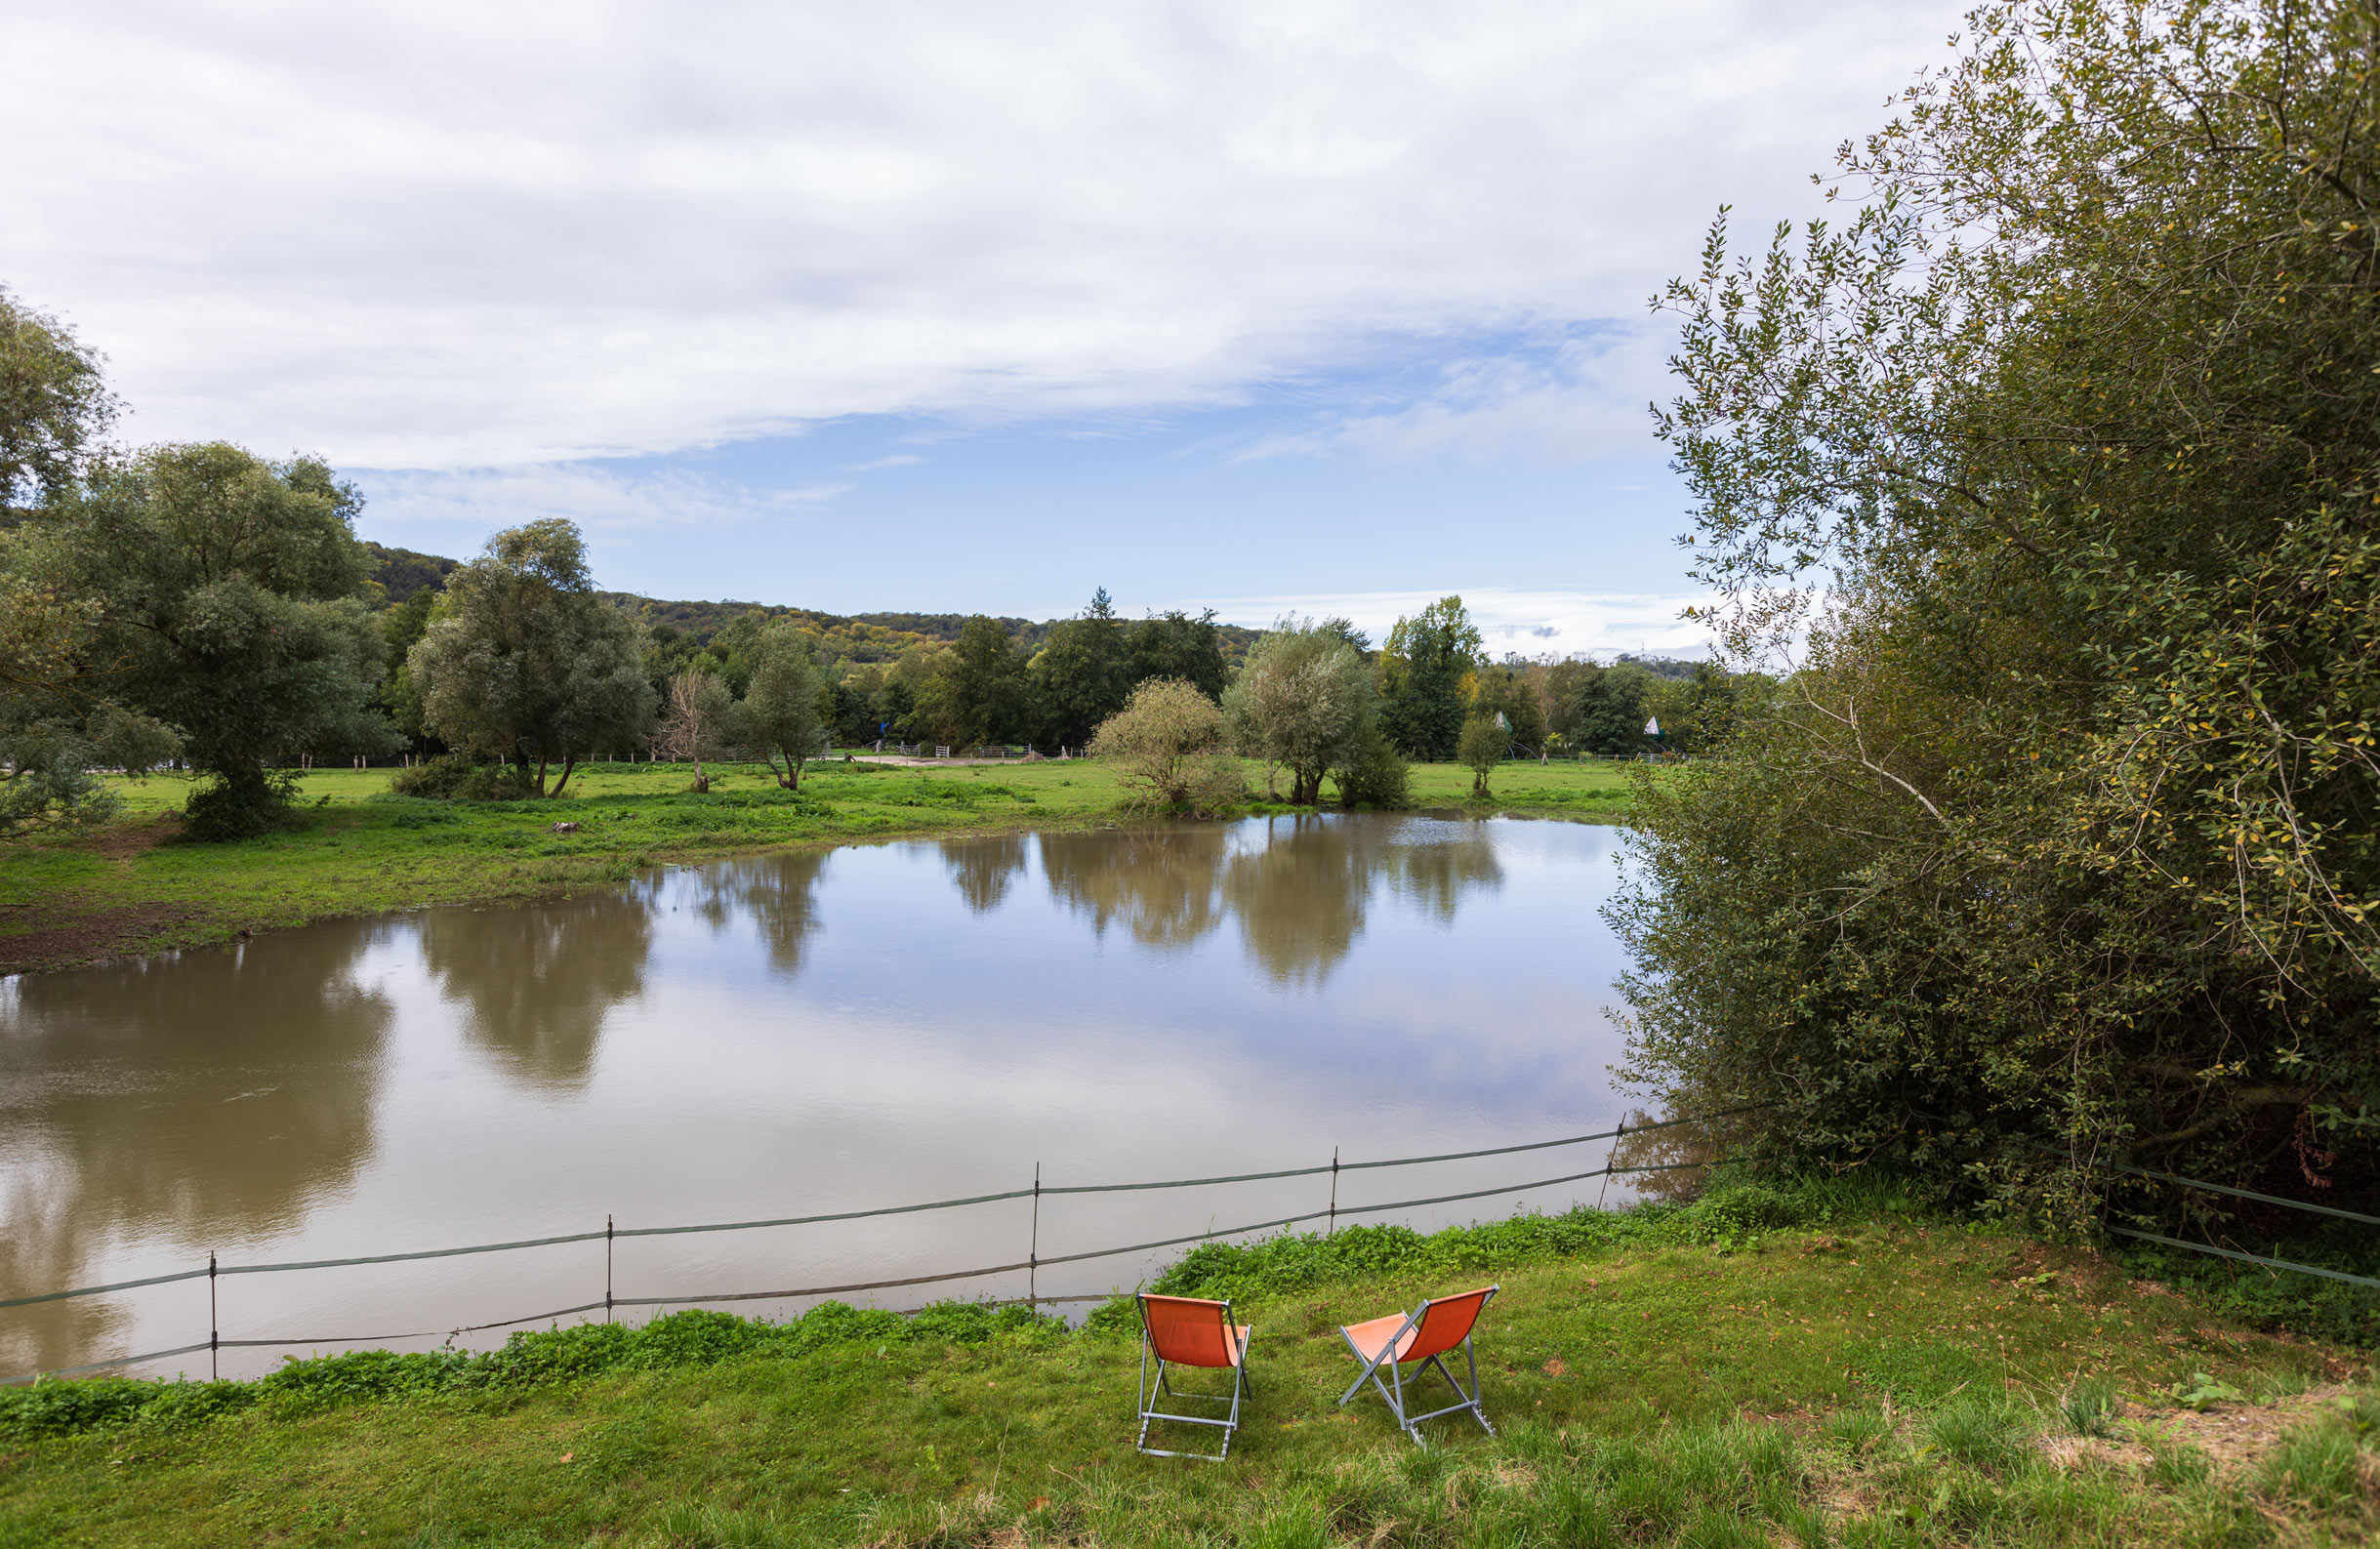 The view from the roof of your luxury accommodation and birdwatching hide ‒ Maison des Oiseaux, an unusaul place to stay in France at the Domaine du Lieu Dieu 